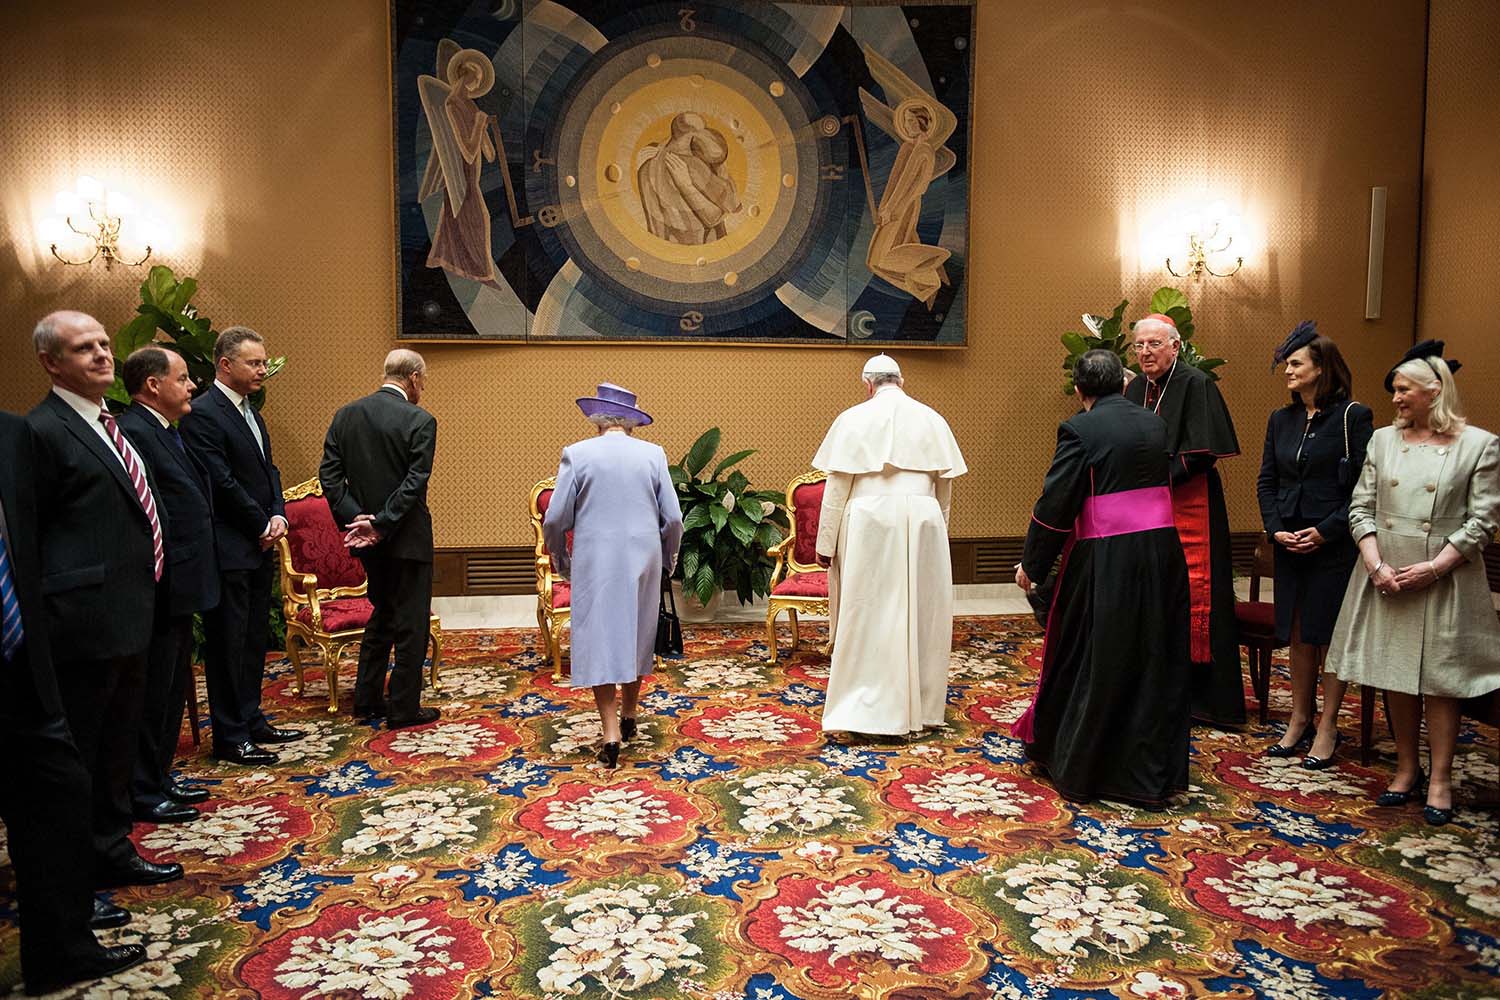 Apr. 3, 2014. H.M Queen Elisabeth and Prince Philip, Duke of Edinburgh meet Pope Francis at the Vatican.